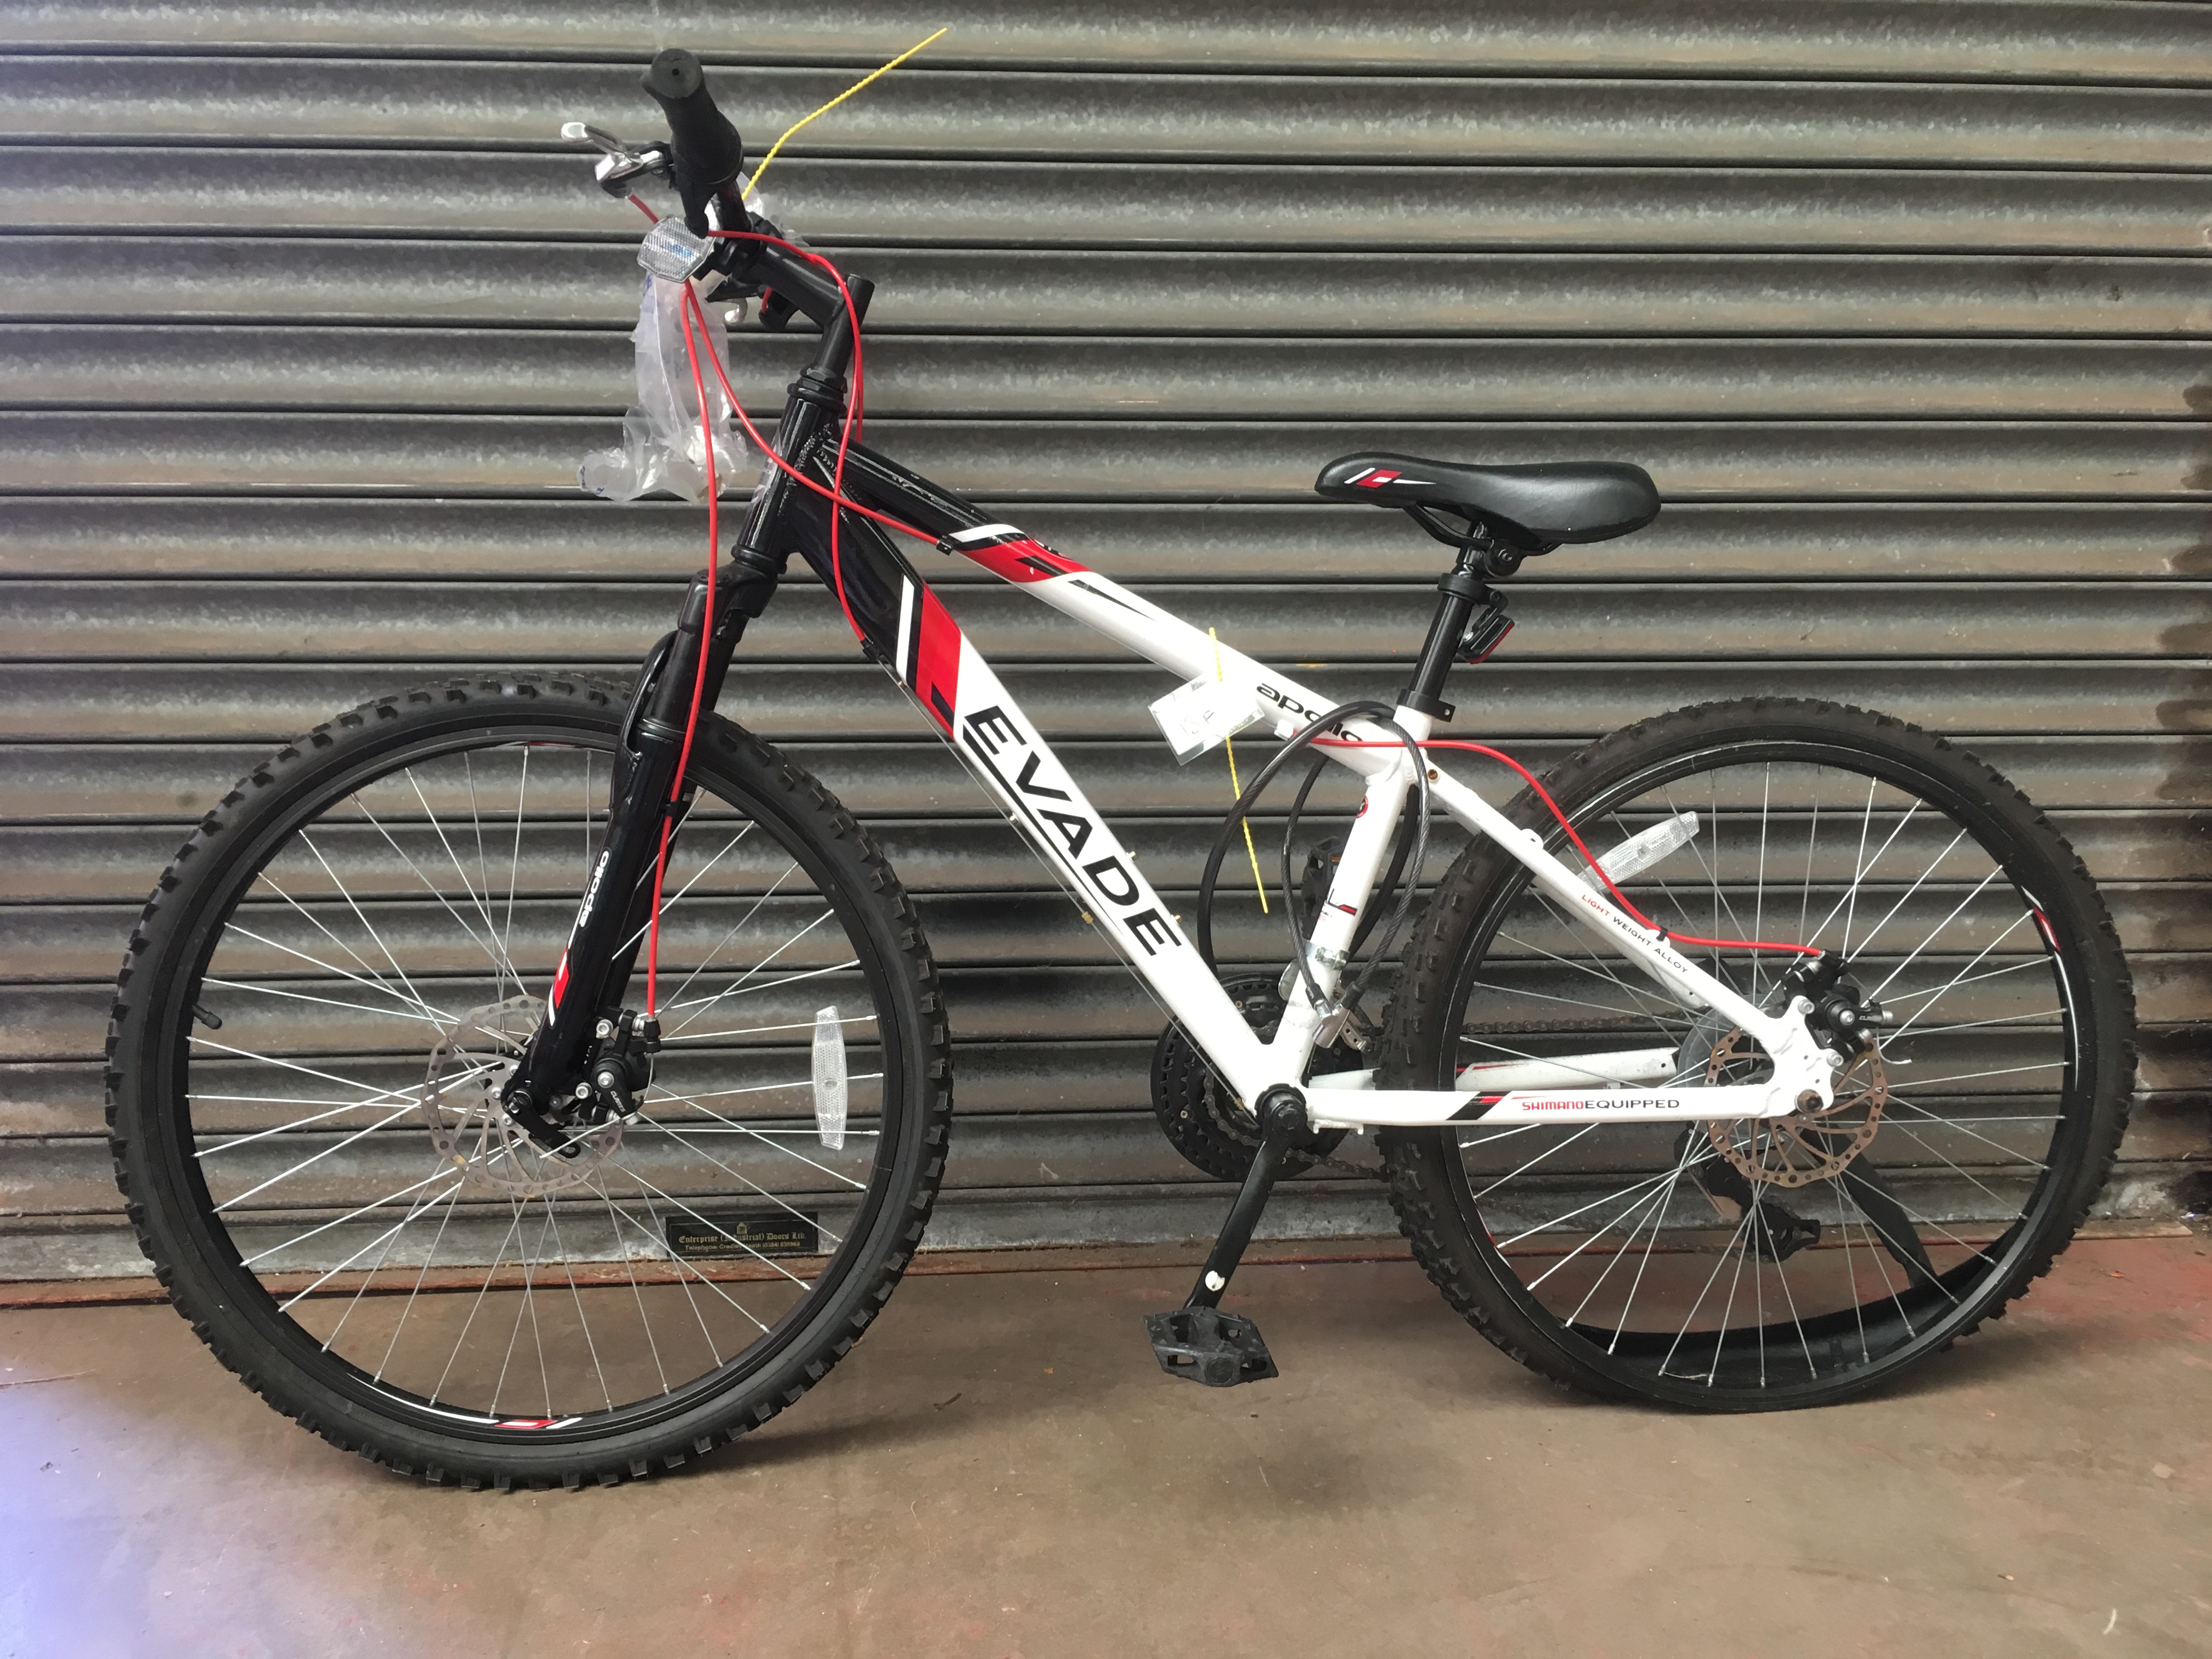 POLICE > Apollo Evade mountain bike / bicycle [NO RESERVE] [VAT ON HAMMER PRICE]